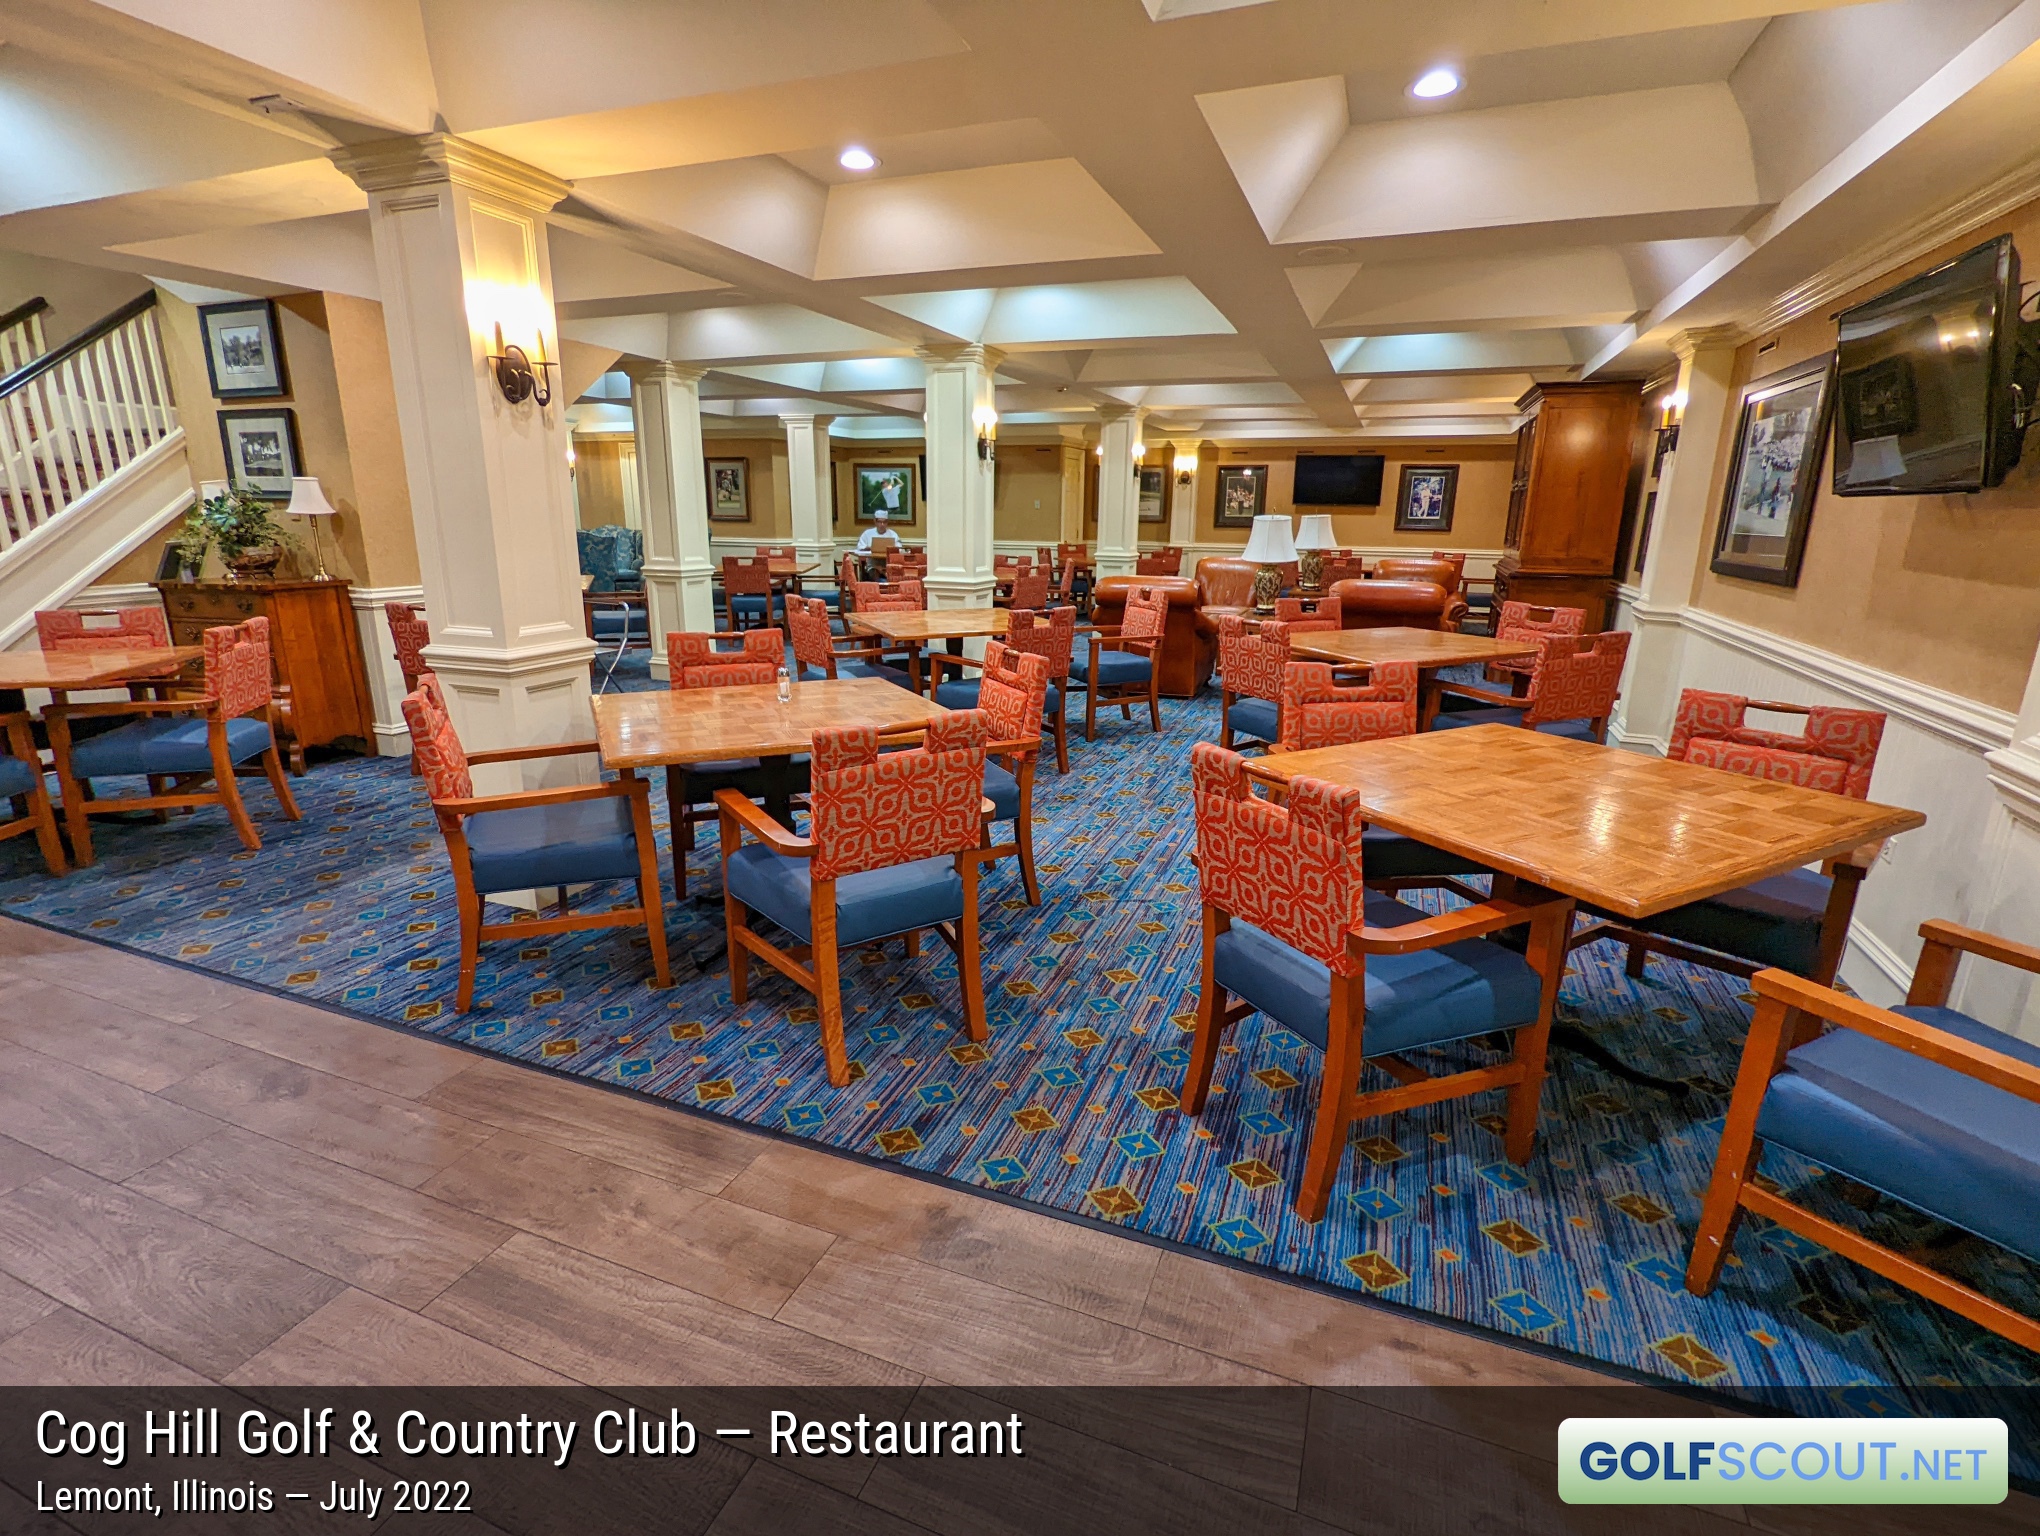 Photo of the restaurant at Cog Hill Course #3 in Lemont, Illinois. The basement dining area in the main clubhouse.